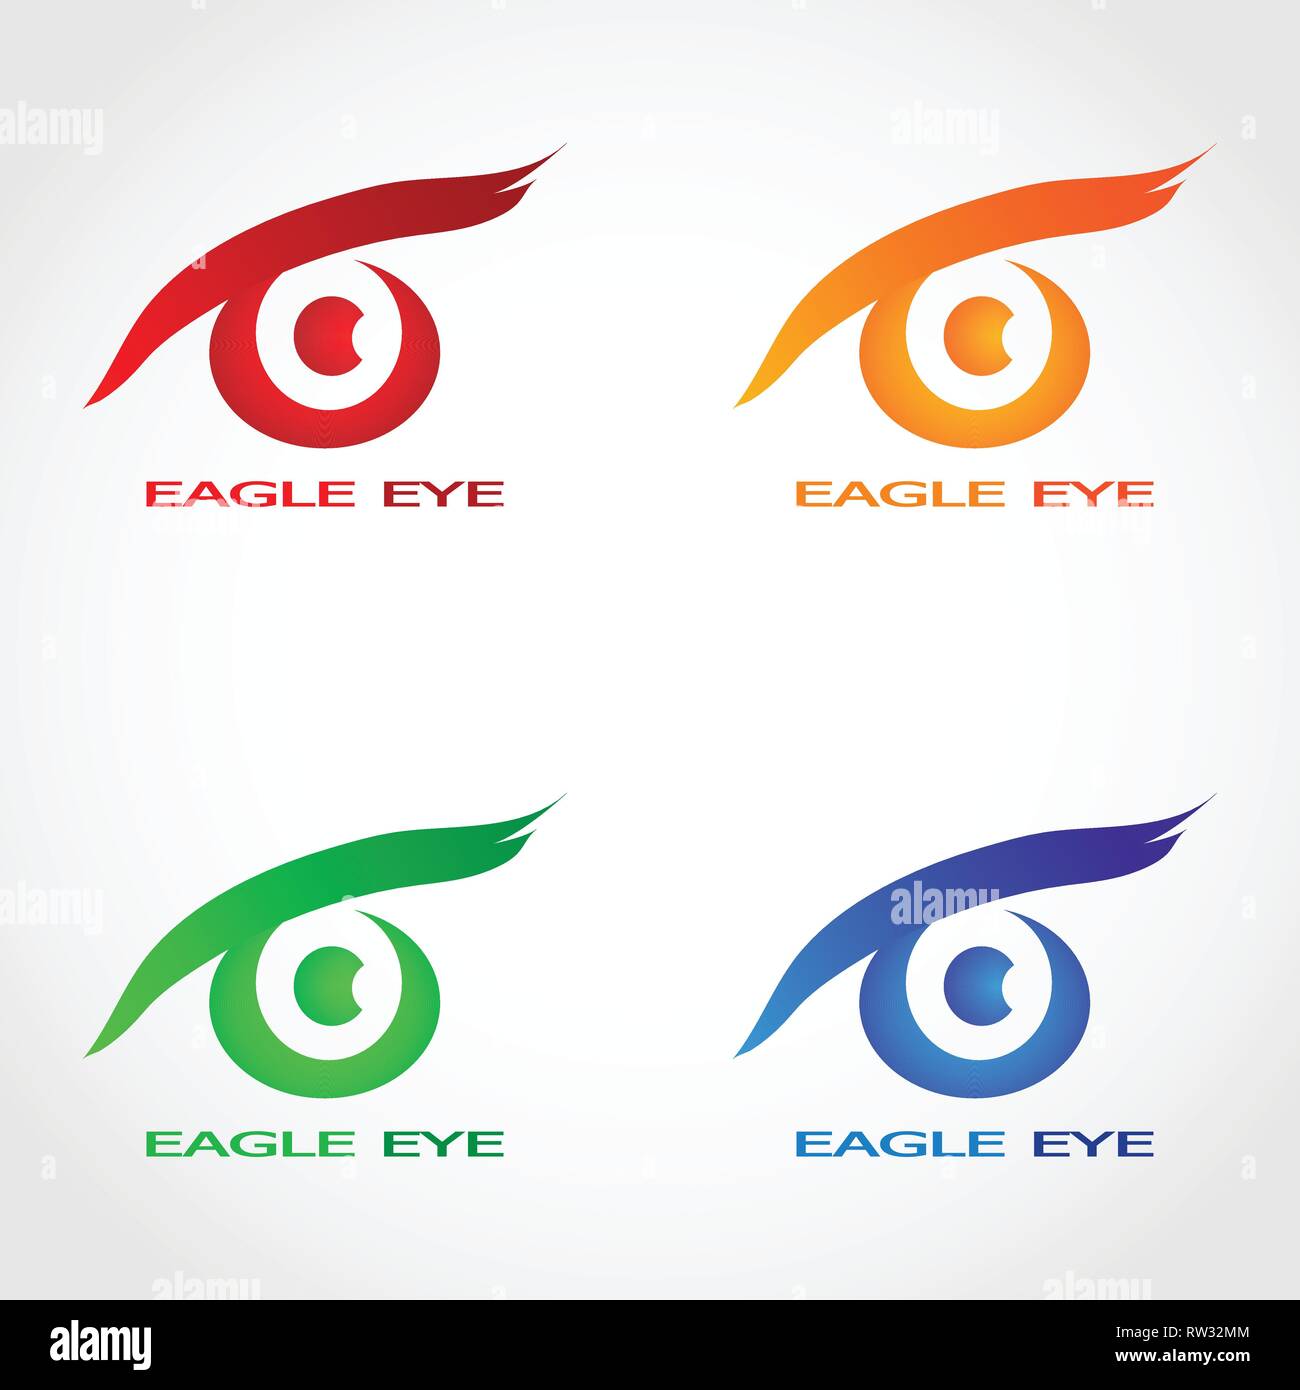 This Logo Has An Eagle Eye The Meaning Is That Eagle Eyes Can See With Focus And Cover A Large Area Stock Vector Image Art Alamy